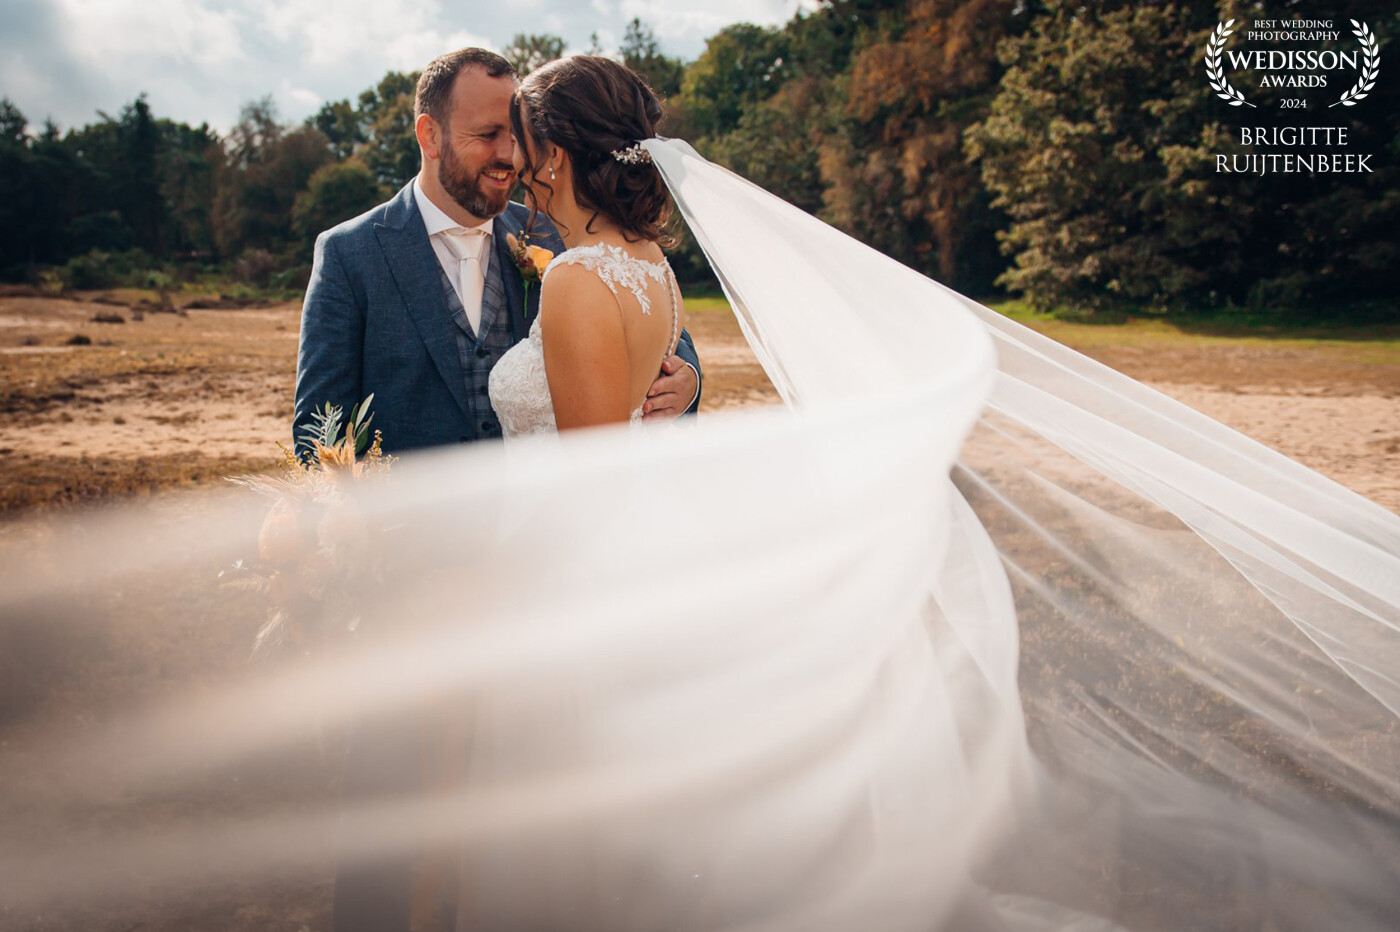 "The wedding of Saskia and Bram took place on a beautiful day in September. I love lifestyle photography and am always curious about what will happen. And then the wind took over..."